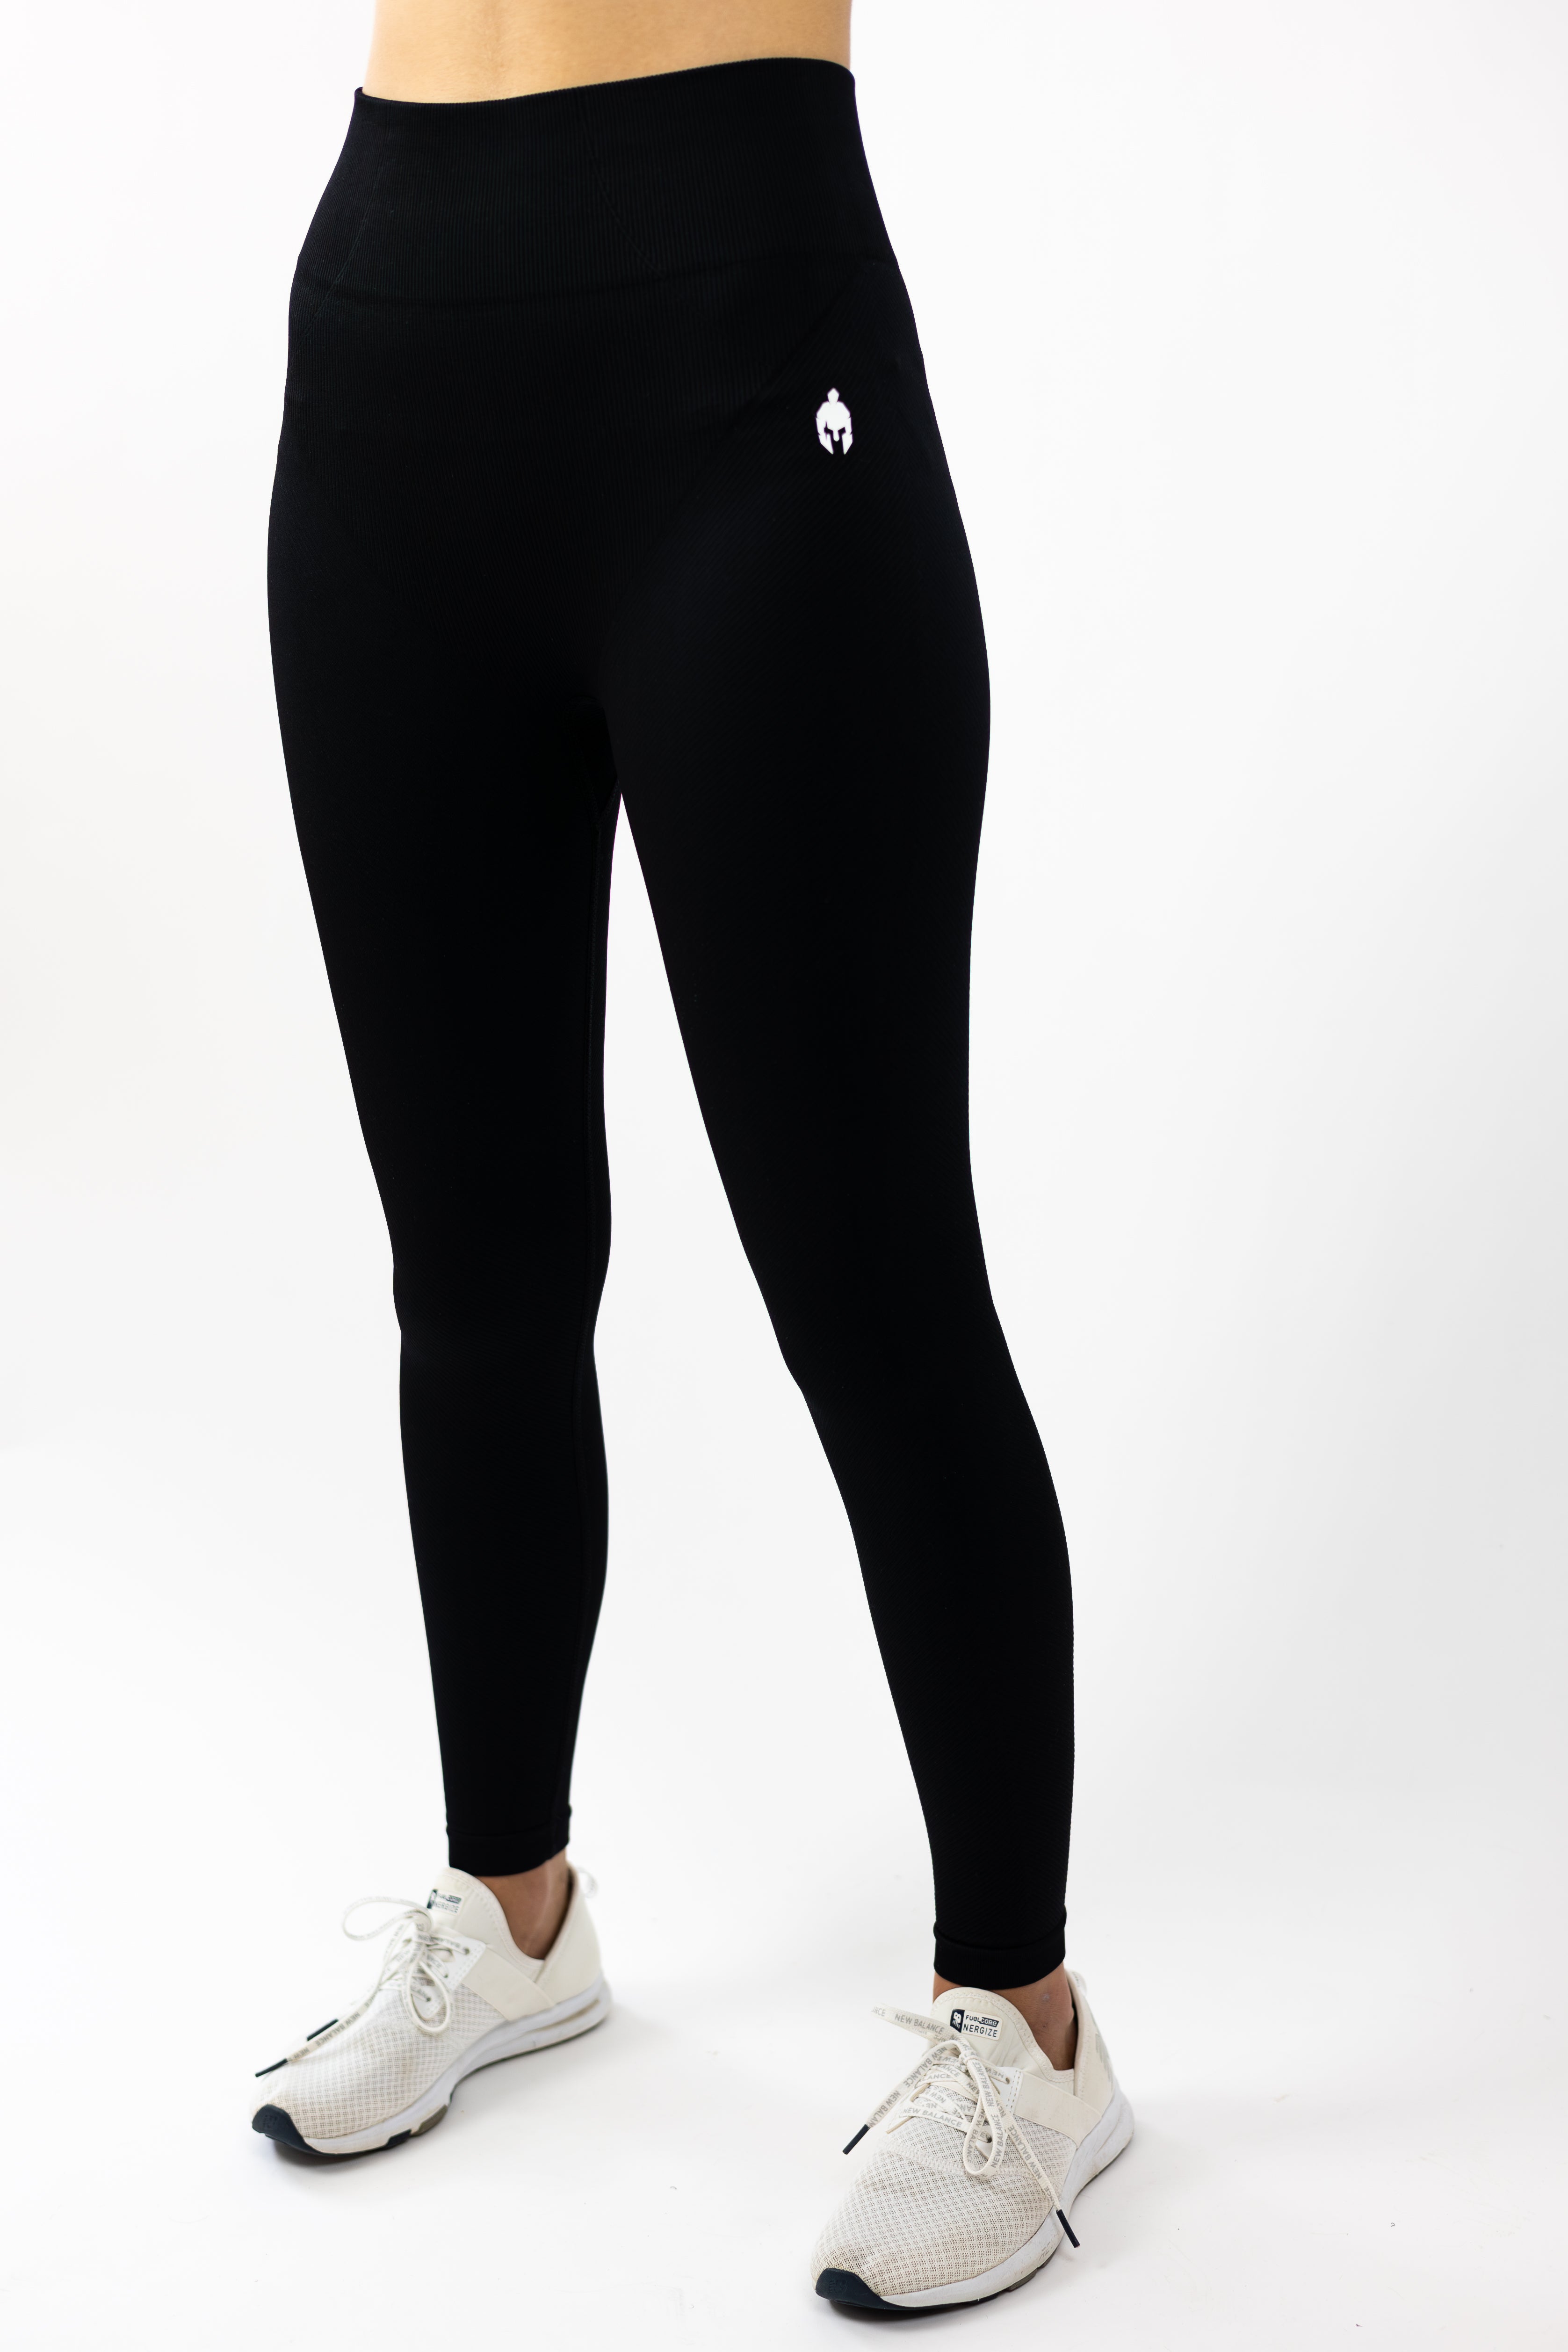 Rarity Seamless Workout Leggings - Strength of One Gym Apparel